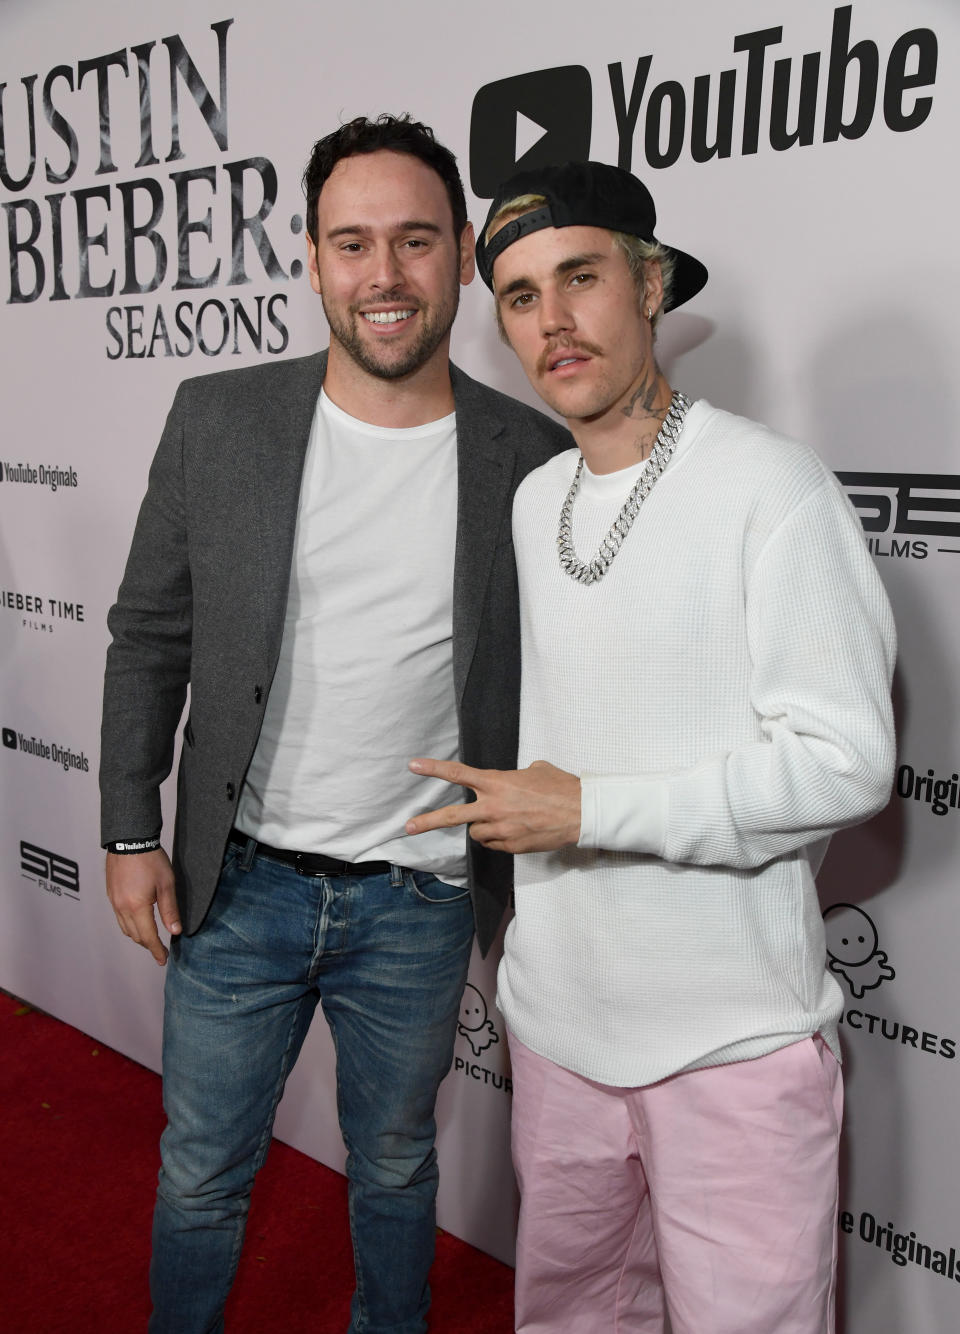 Scooter Braun and Justin Bieber attend YouTube Originals' premiere of 'Justin Bieber: Seasons' in January 2020. (Kevin Mazur/Getty Images for YouTube Originals)